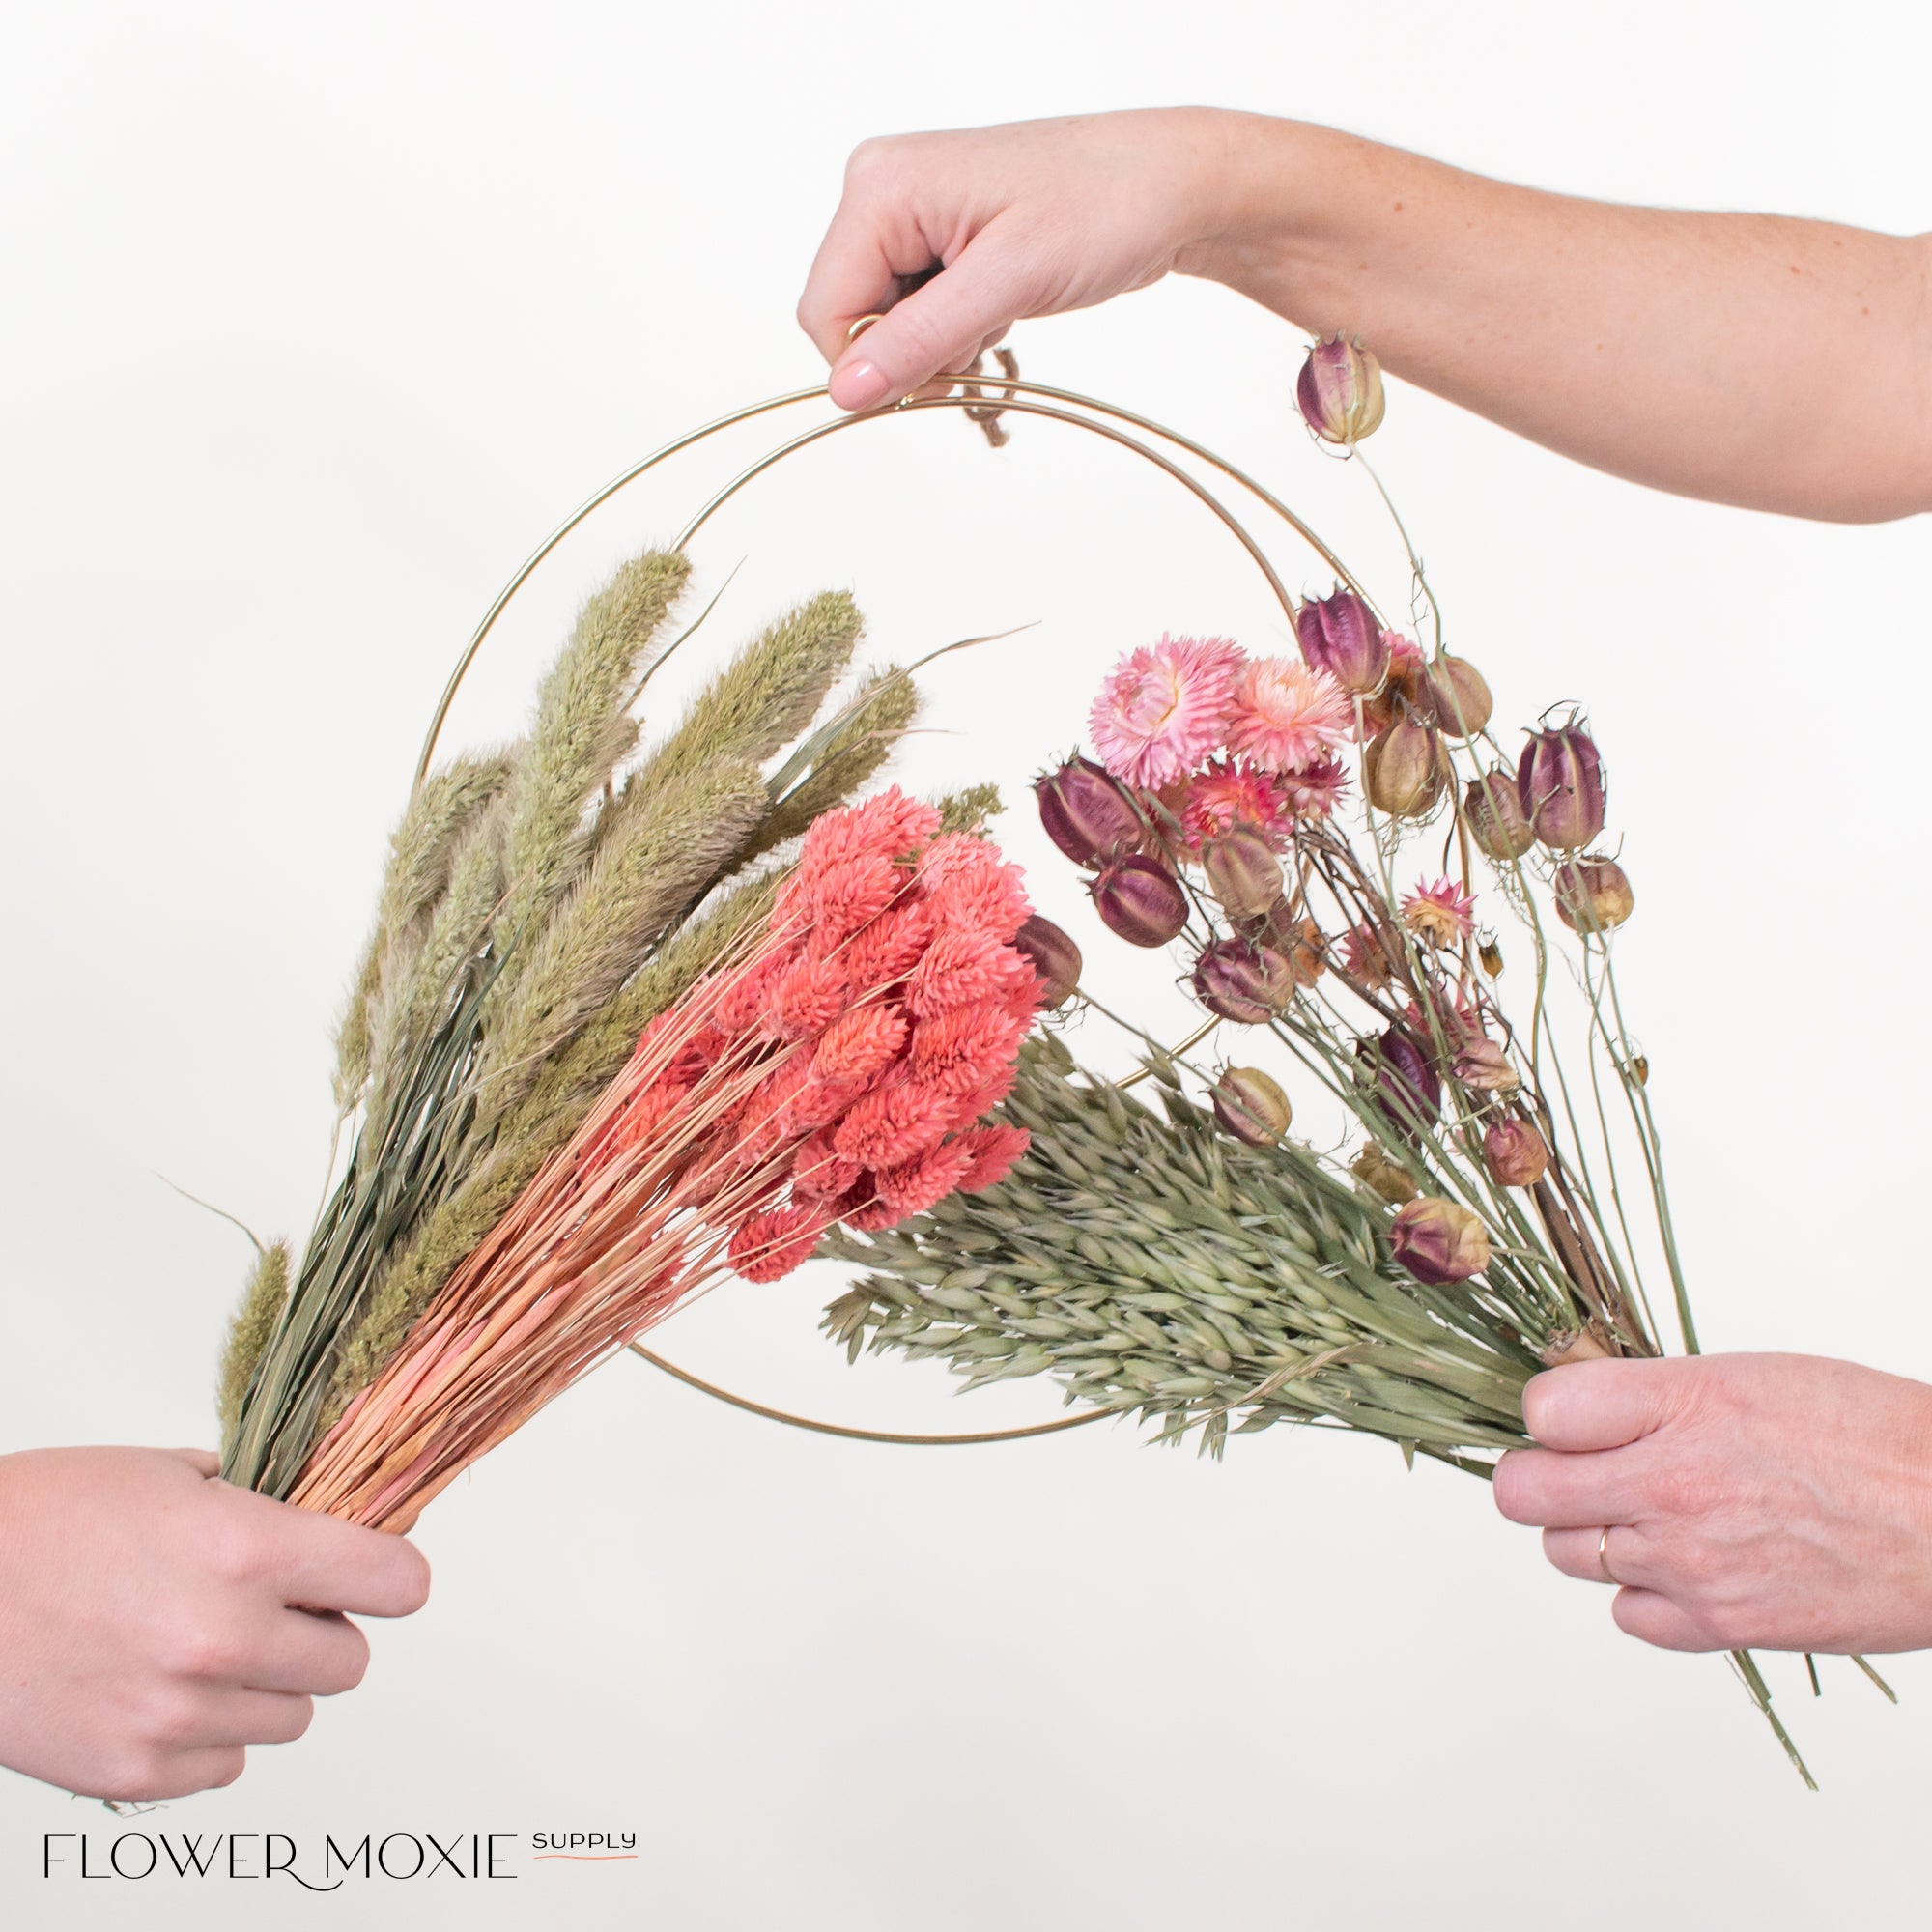 Dried and Silk Flowers, DIY Flower Supply